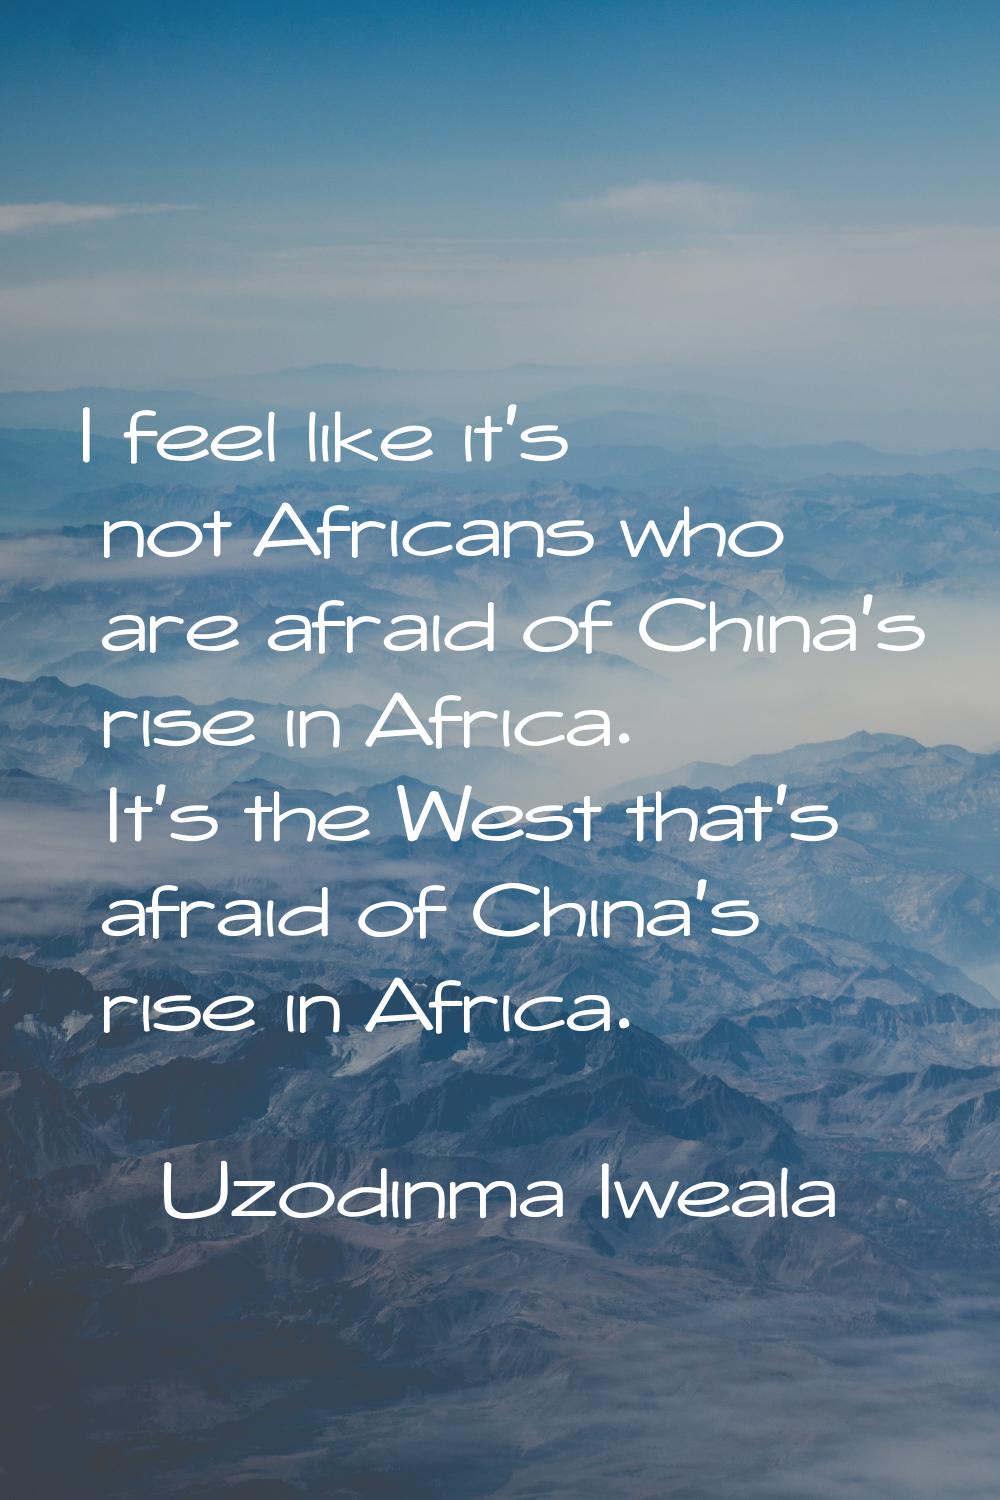 I feel like it's not Africans who are afraid of China's rise in Africa. It's the West that's afraid